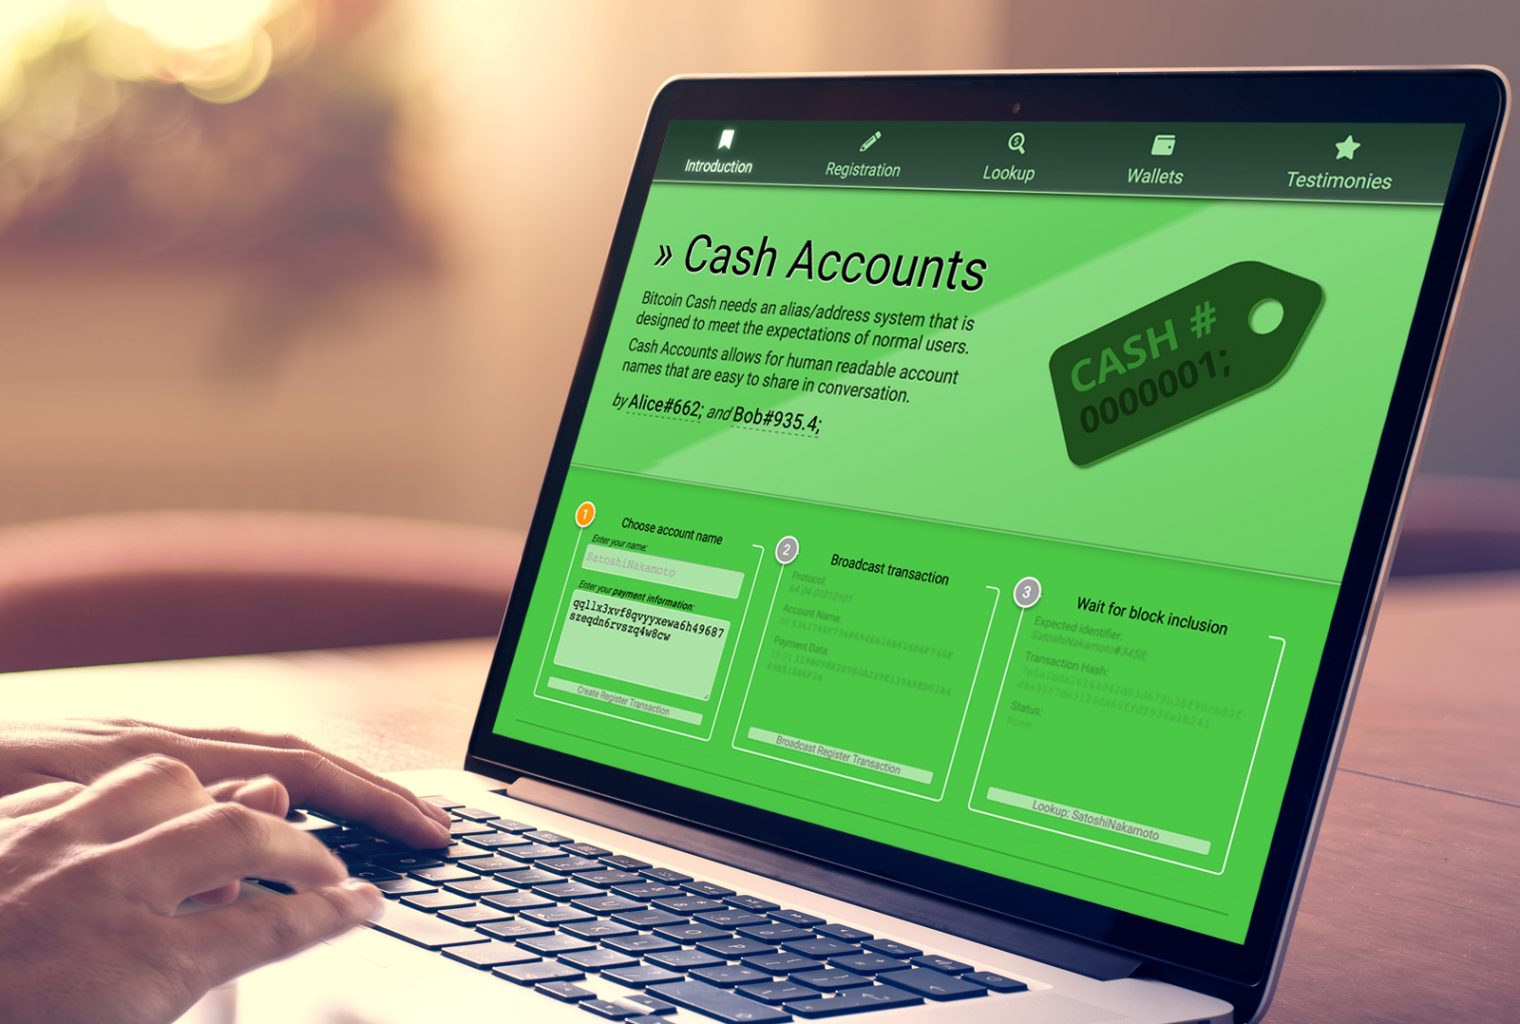 The Cashaccount Info Platform Tethers Names To Bitcoin Cash - 